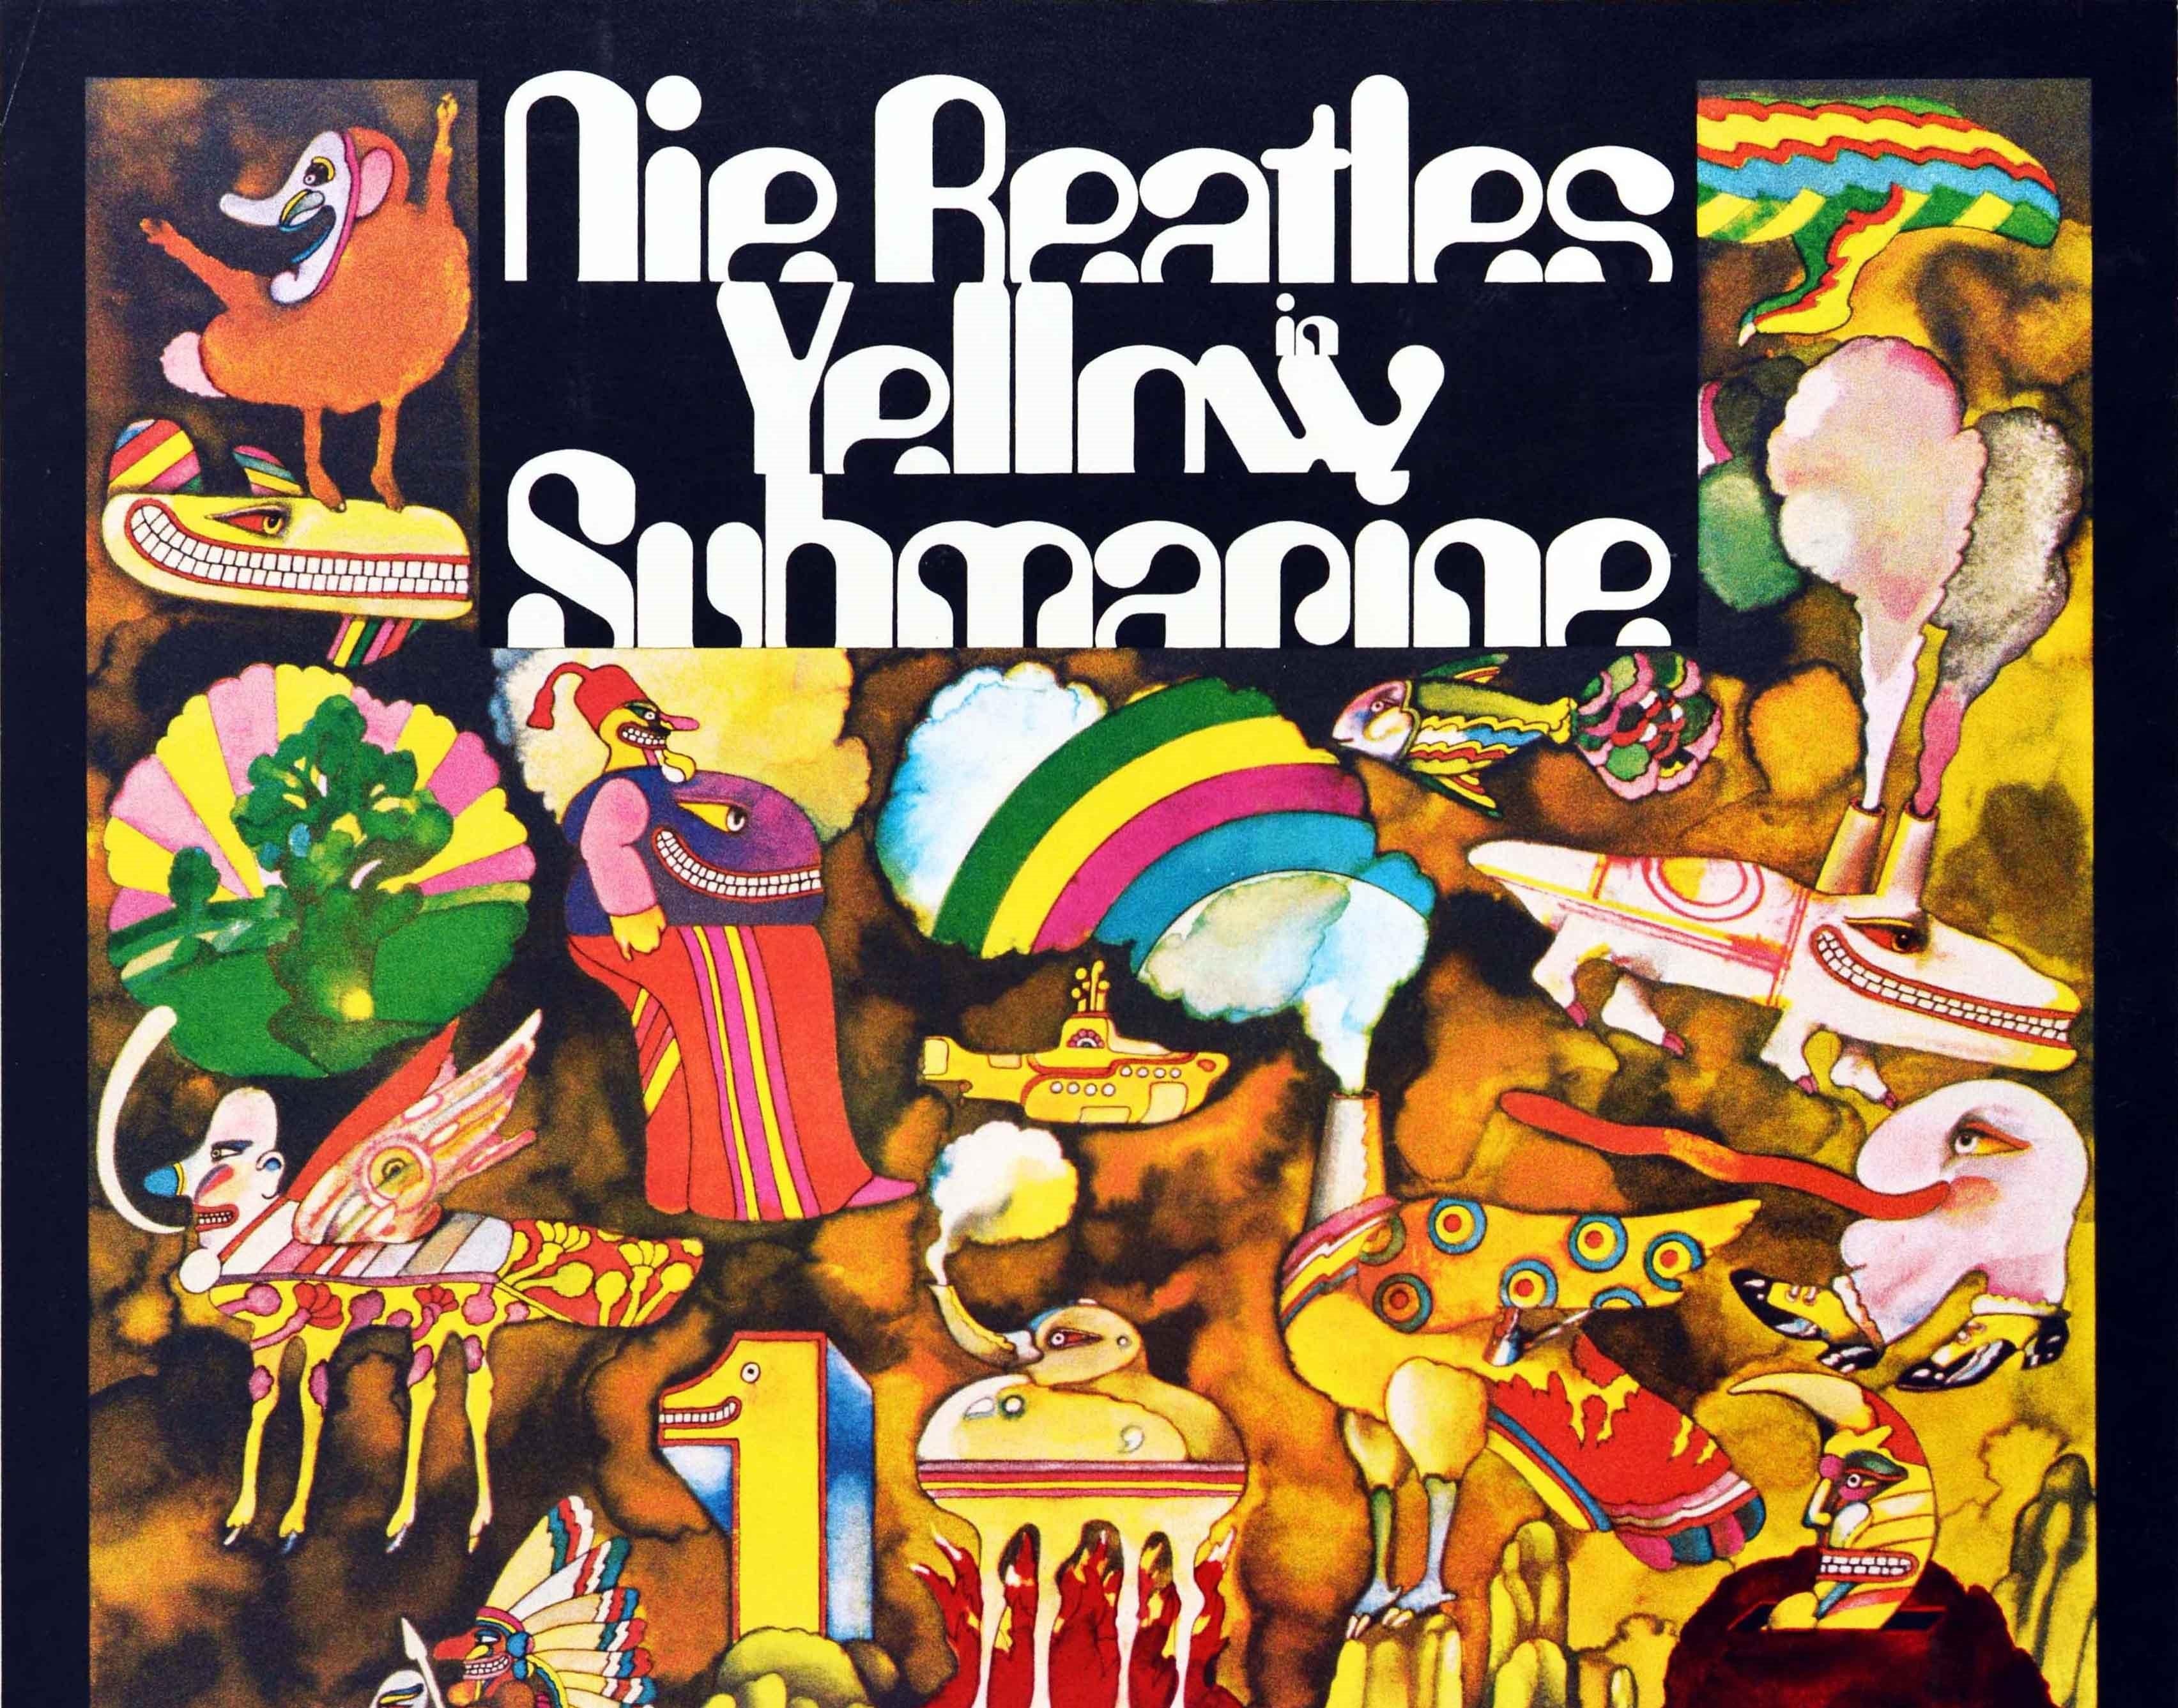 Original vintage advertising poster for the iconic 1968 British animated film Yellow Submarine directed by George Dunning and featuring the music of and starring The Beatles (John Lennon, Paul McCartney, George Harrison and Ringo Starr) - Die